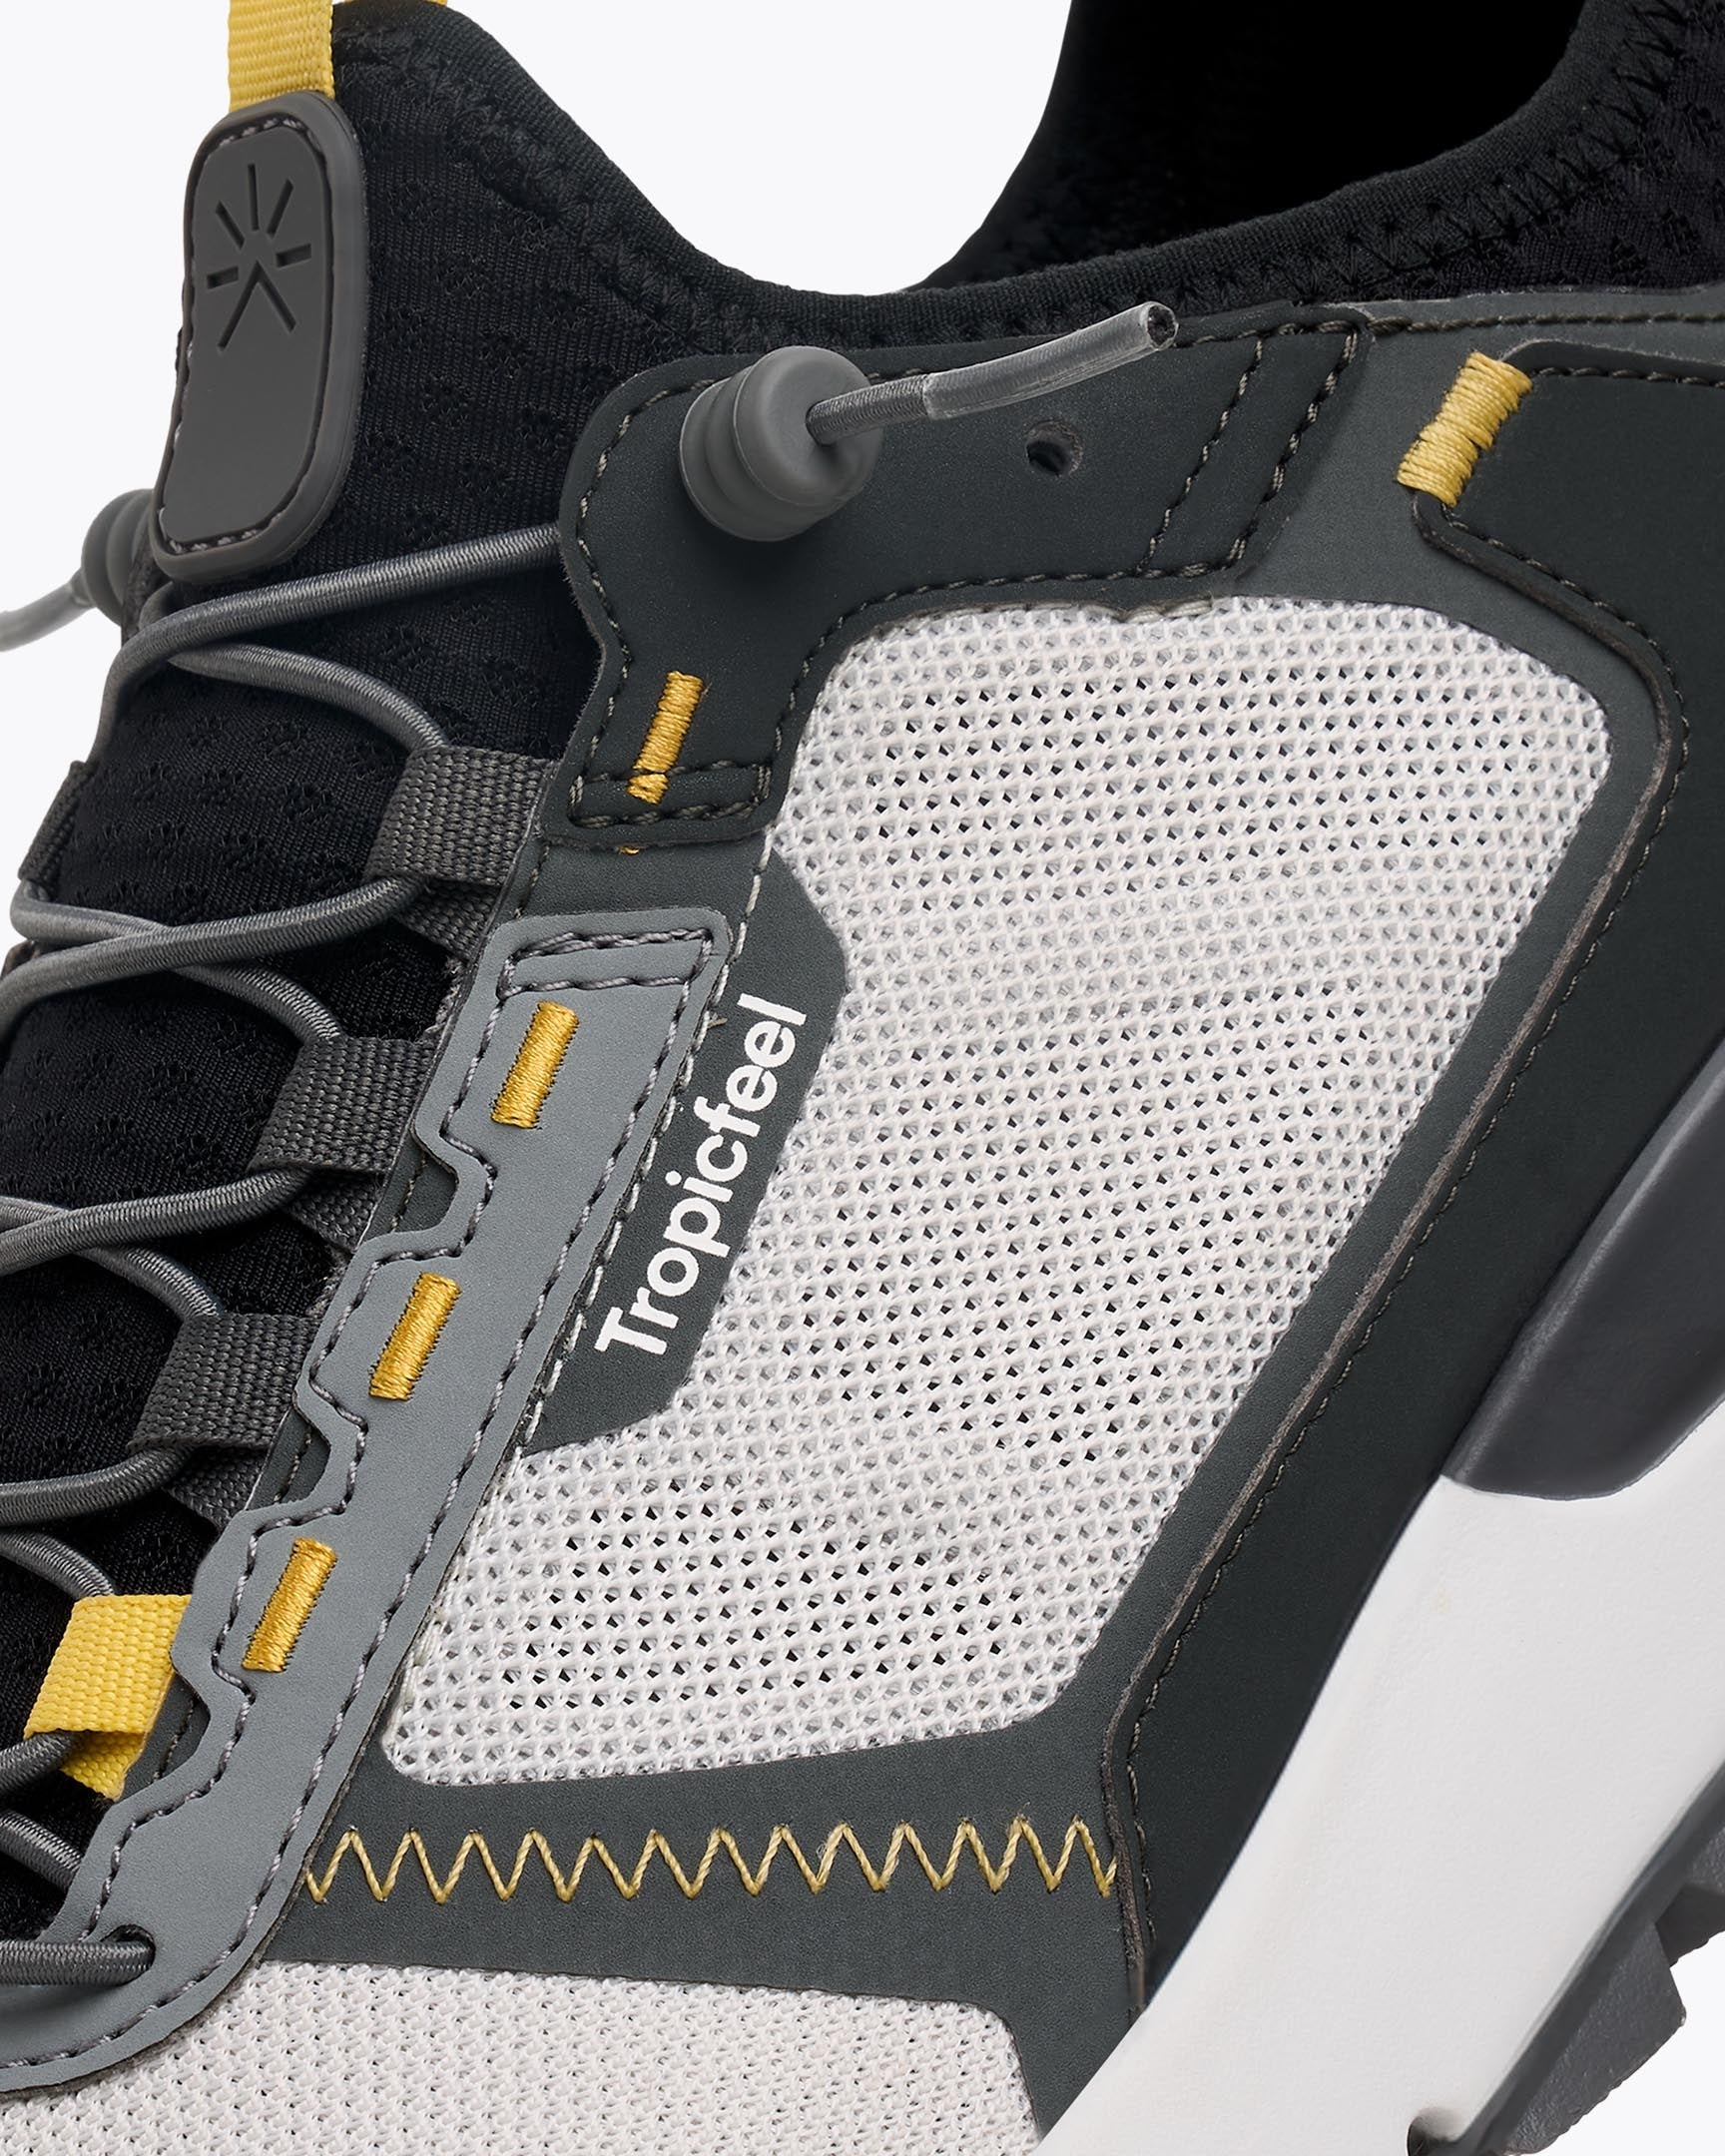 All-Terrain X - Sneaker for Extreme Adventures